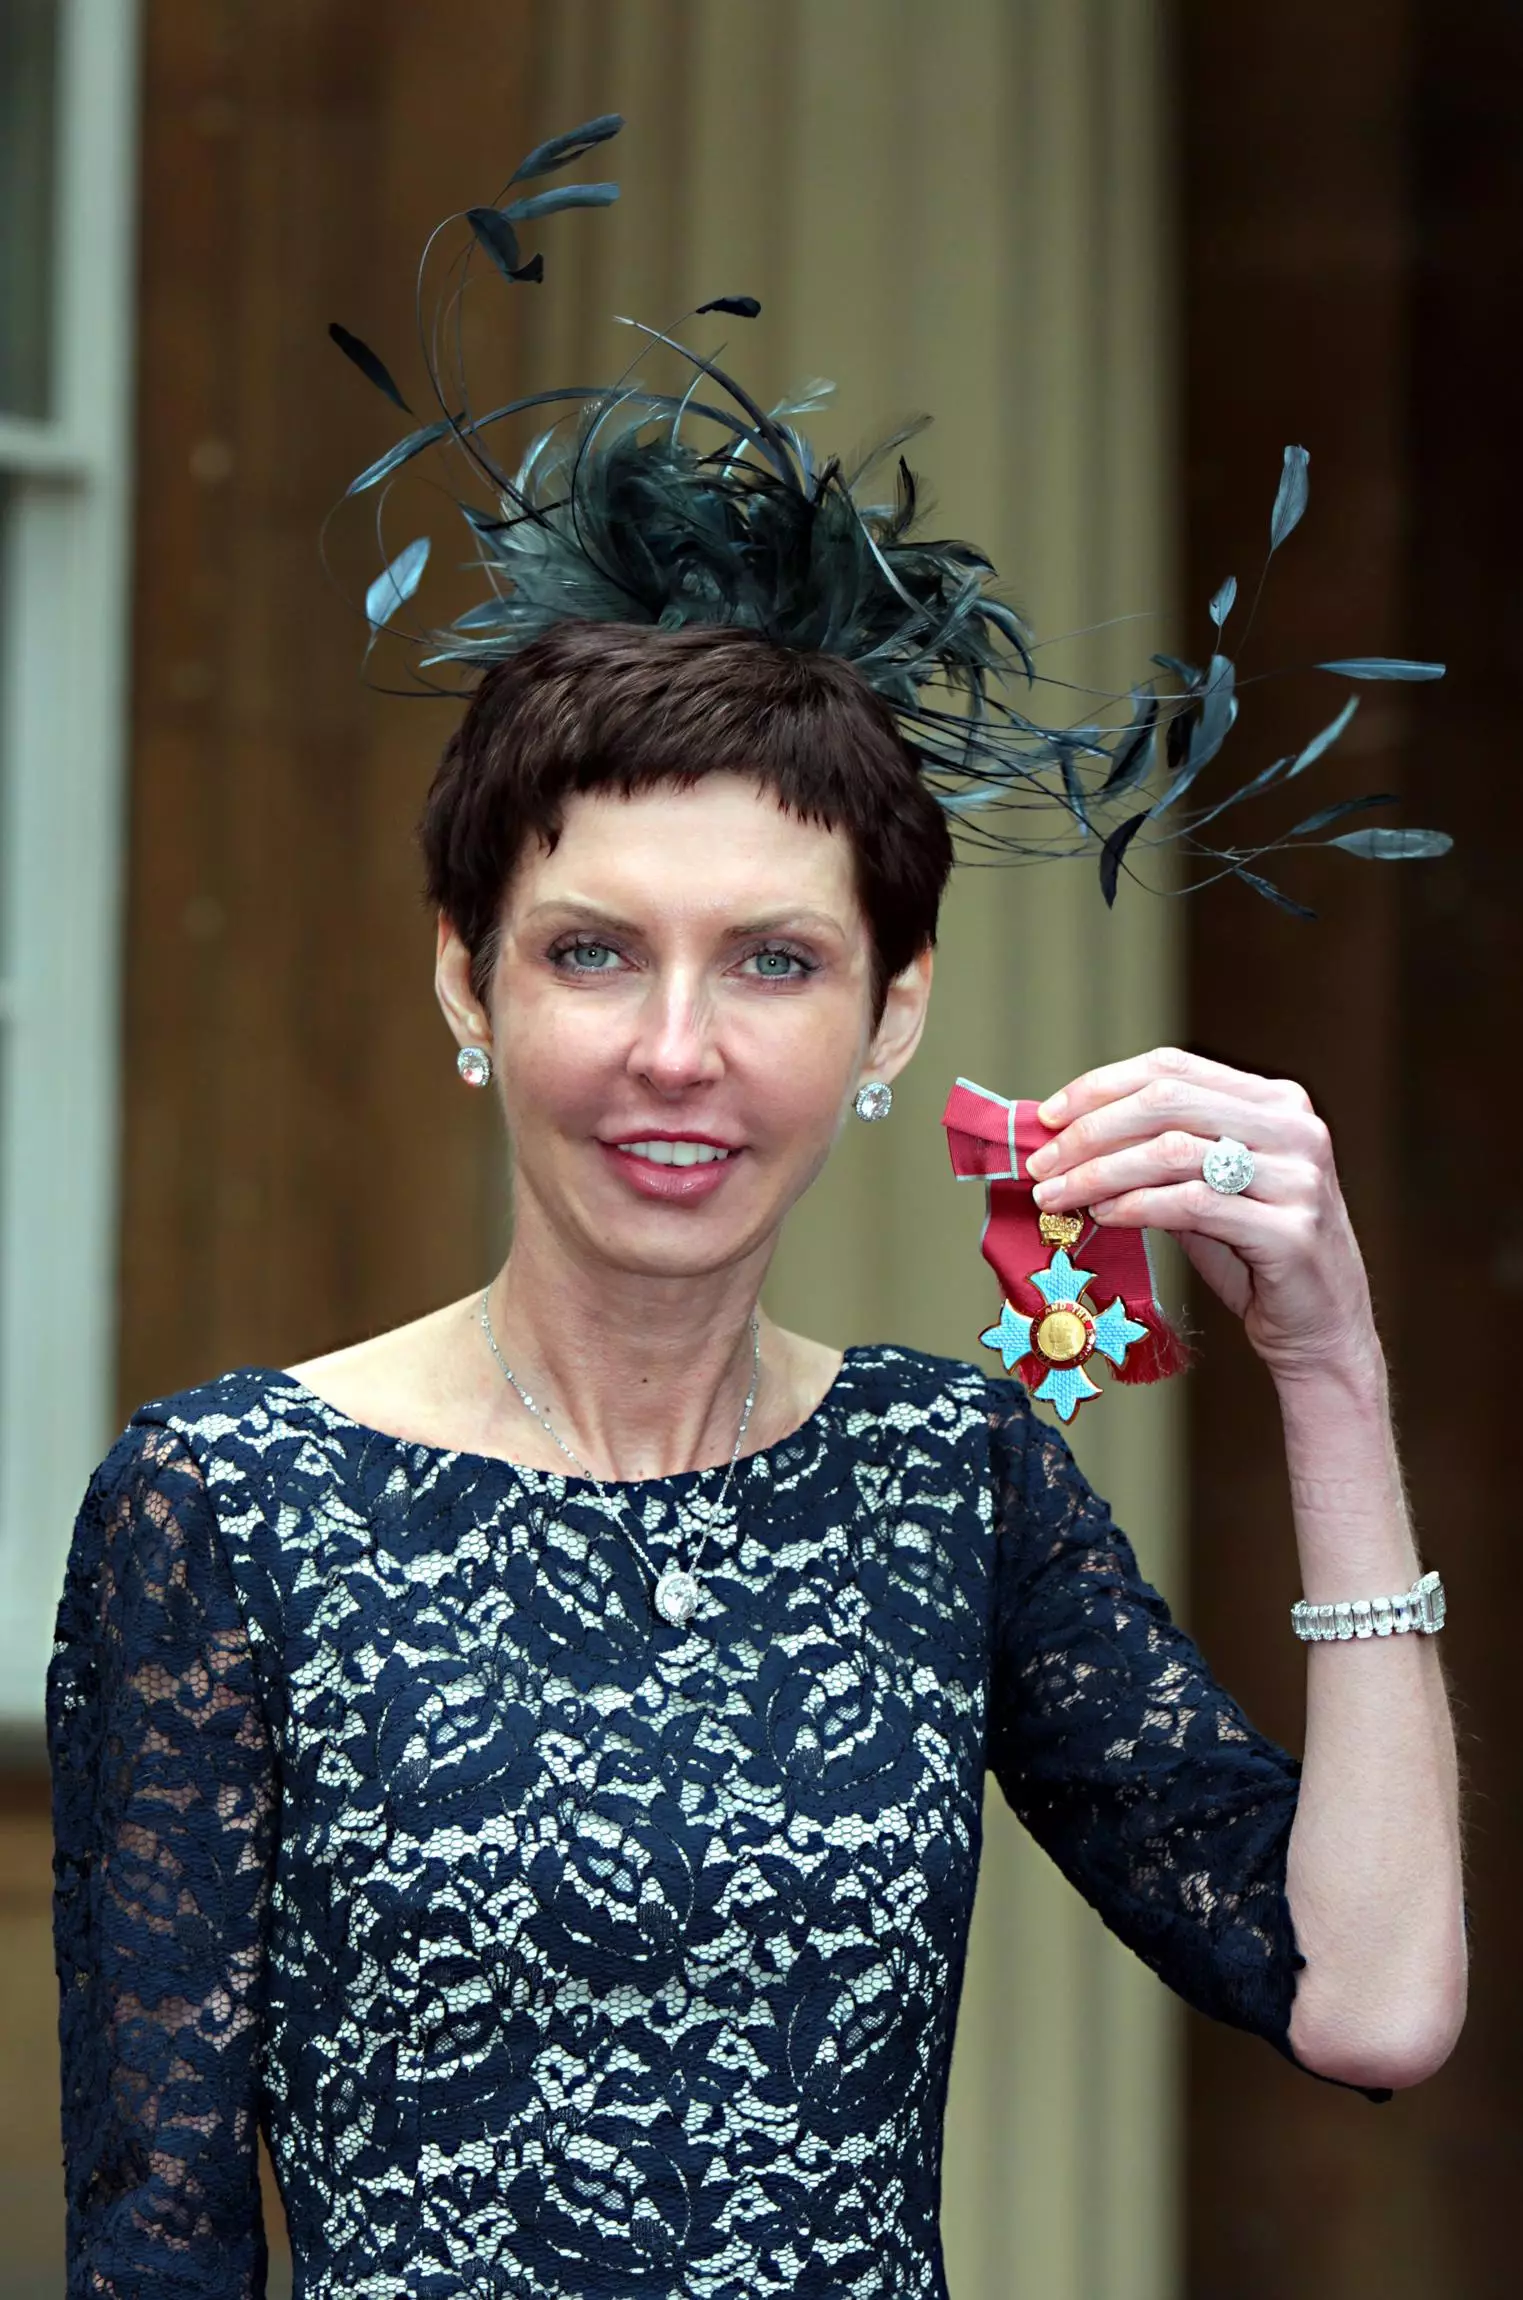 Denise Coates with her Commander of the British Empire (CBE) medal which was presented by the Prince of Wales in 2012.